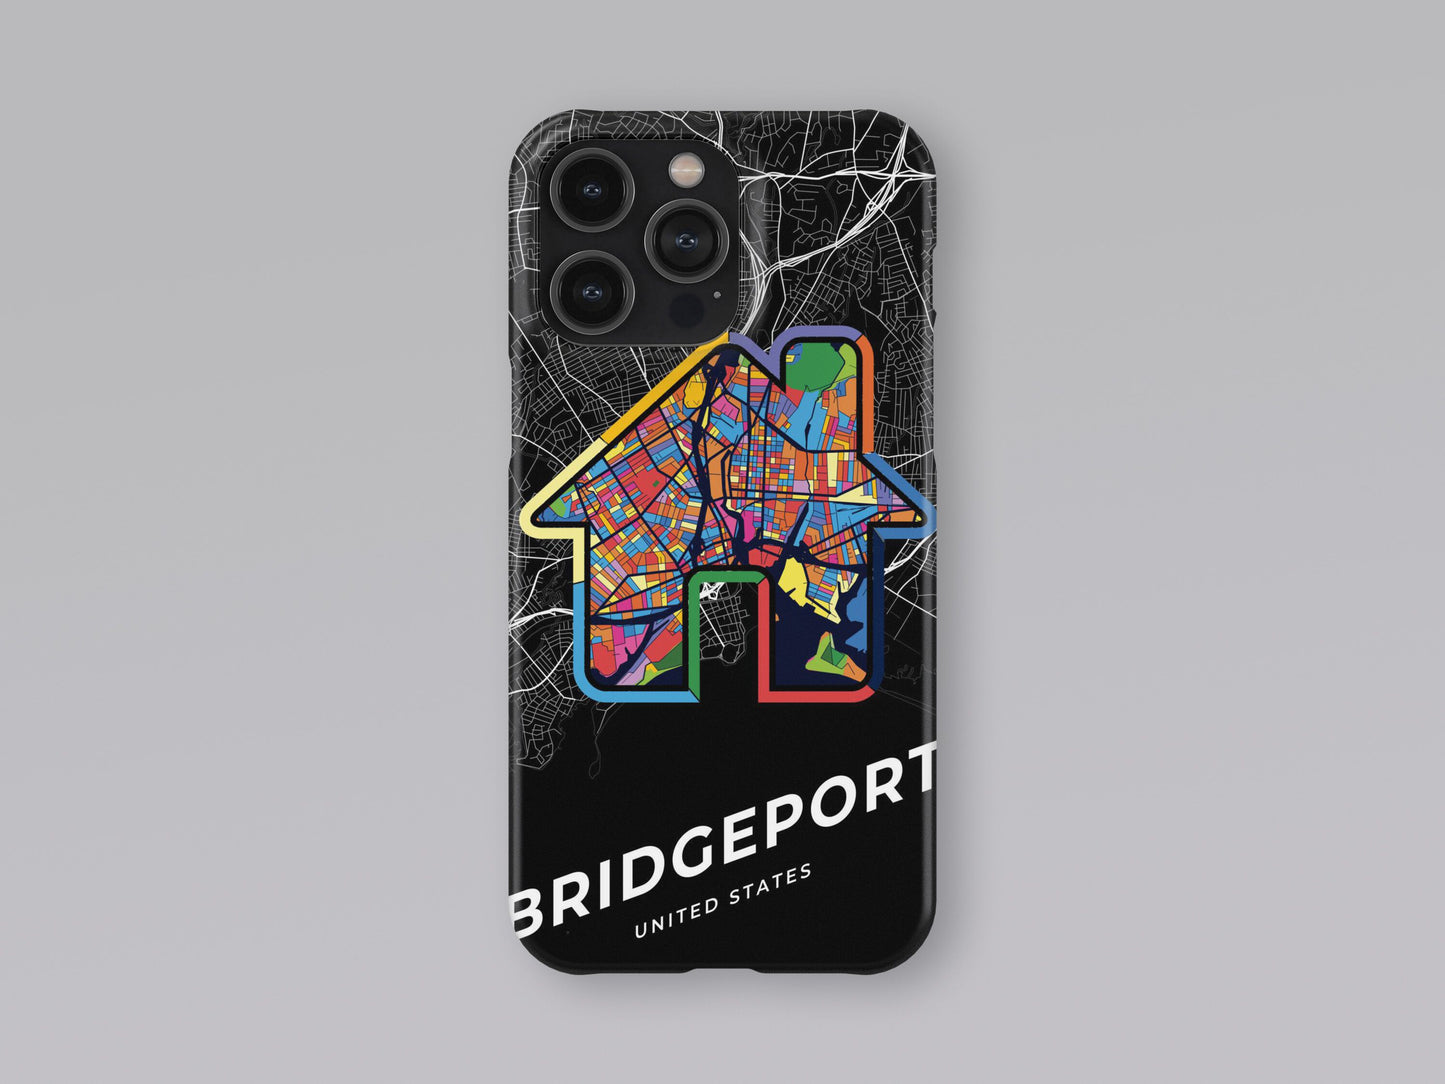 Bridgeport Connecticut slim phone case with colorful icon. Birthday, wedding or housewarming gift. Couple match cases. 3